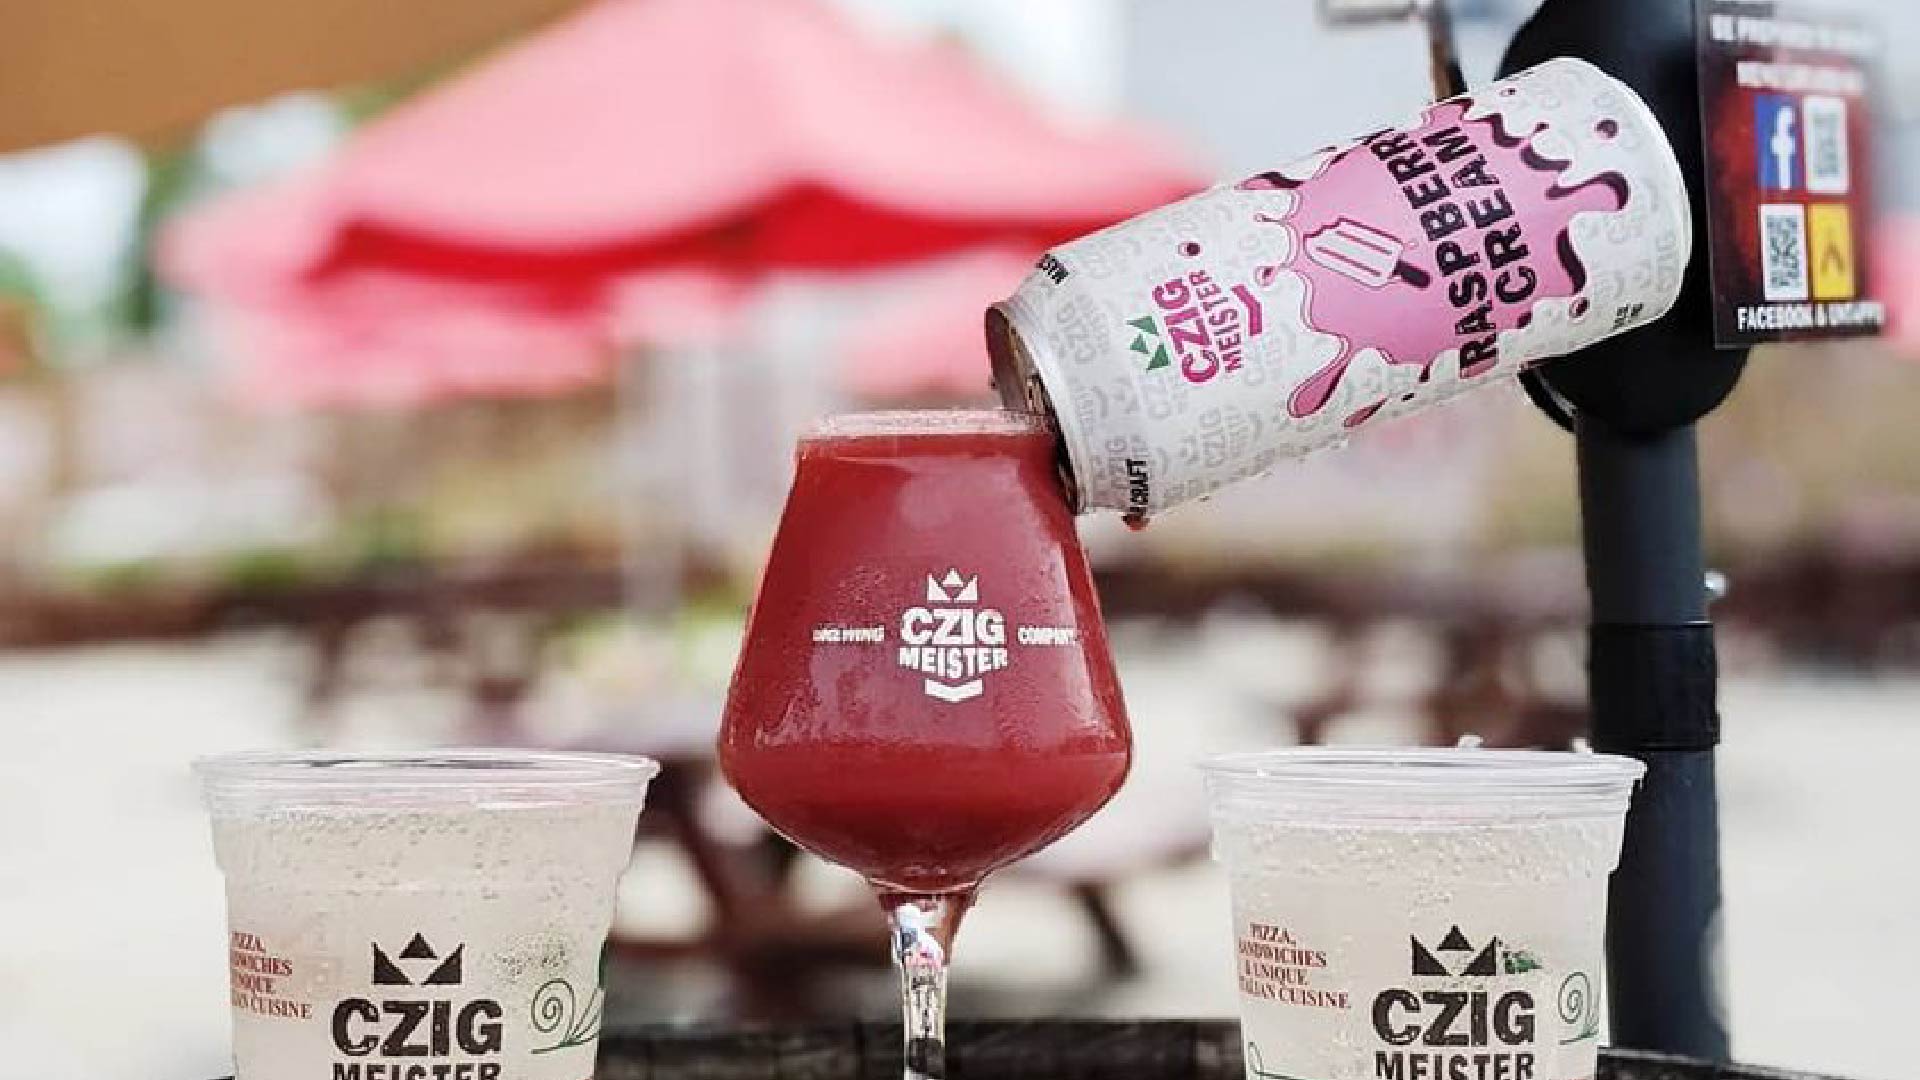 Raspberry Cream Ale at Czig Meister Brewing Company